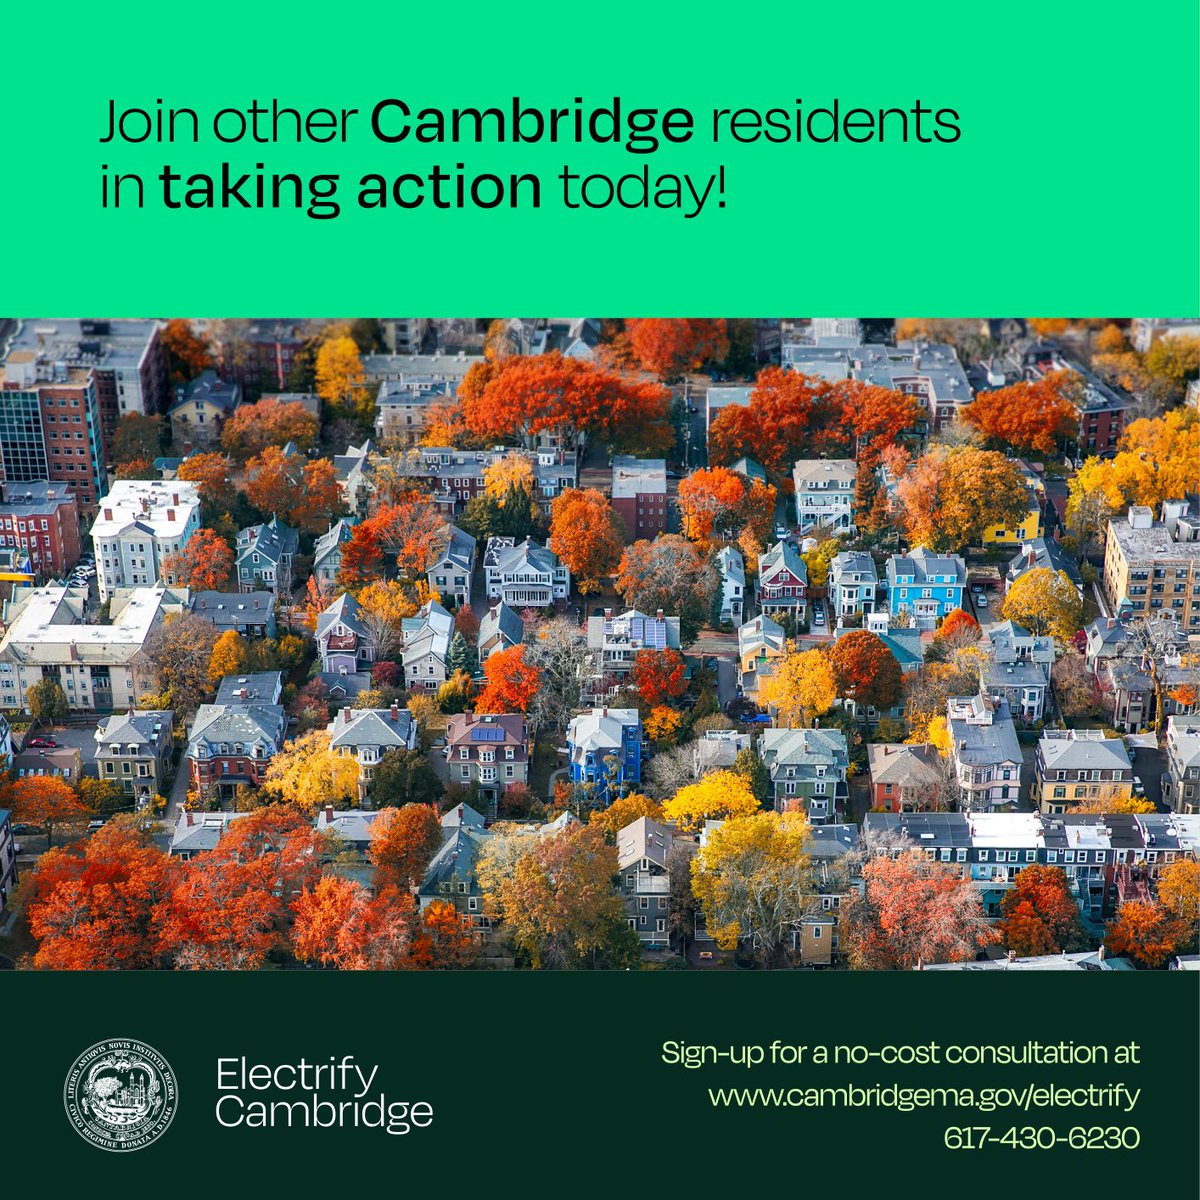 Are you curious about heat pumps or other clean energy systems? Sign up to talk with an expert through Electrify Cambridge to learn about heat pumps, induction stoves, and other clean and all-electric home energy technologies! cambridgema.gov/electrify #CambMA